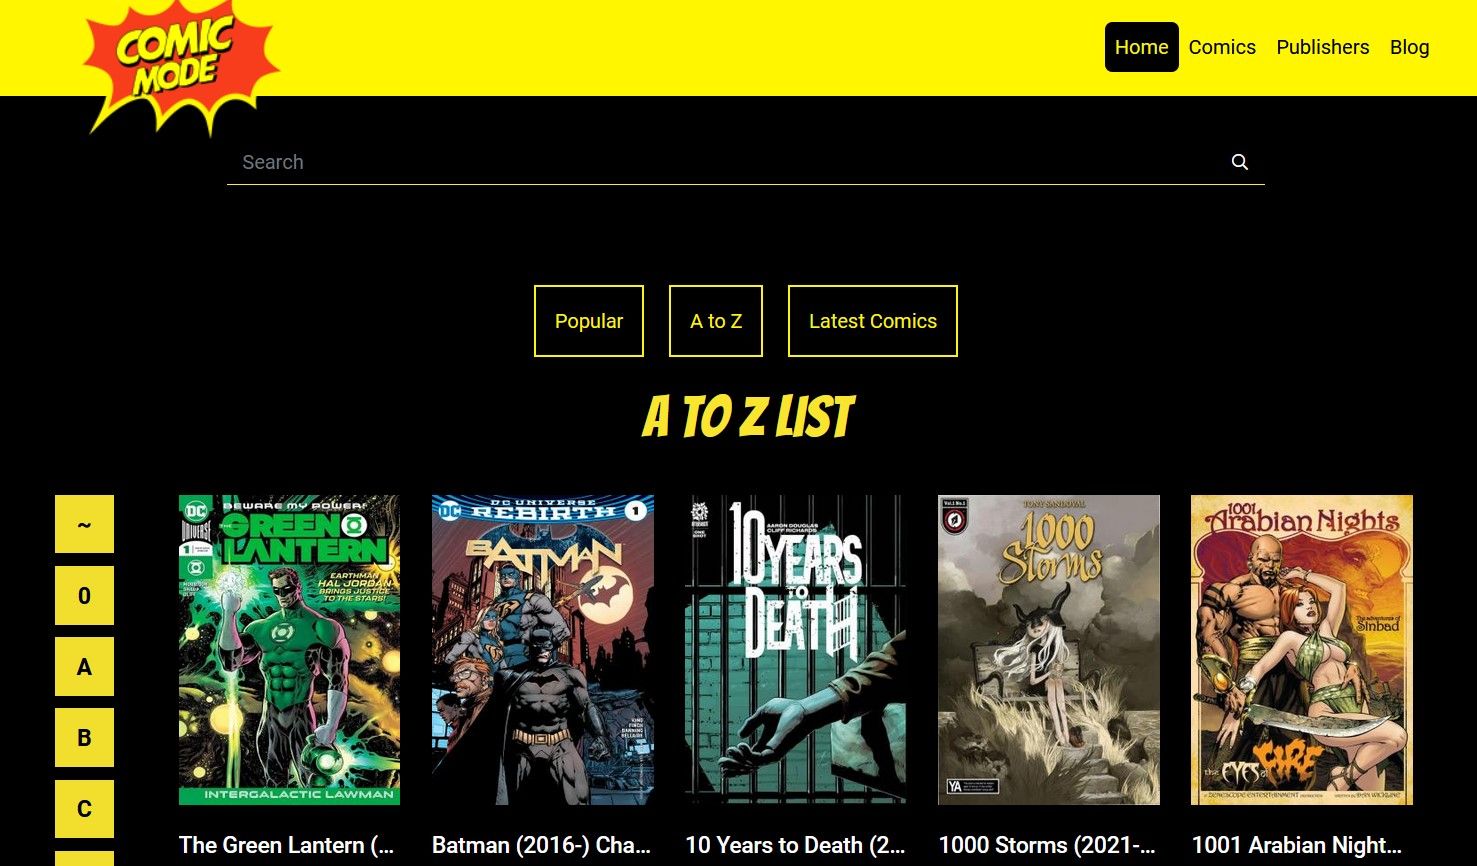 ComicsMode Site for Reading Comic Books and Graphic Novels